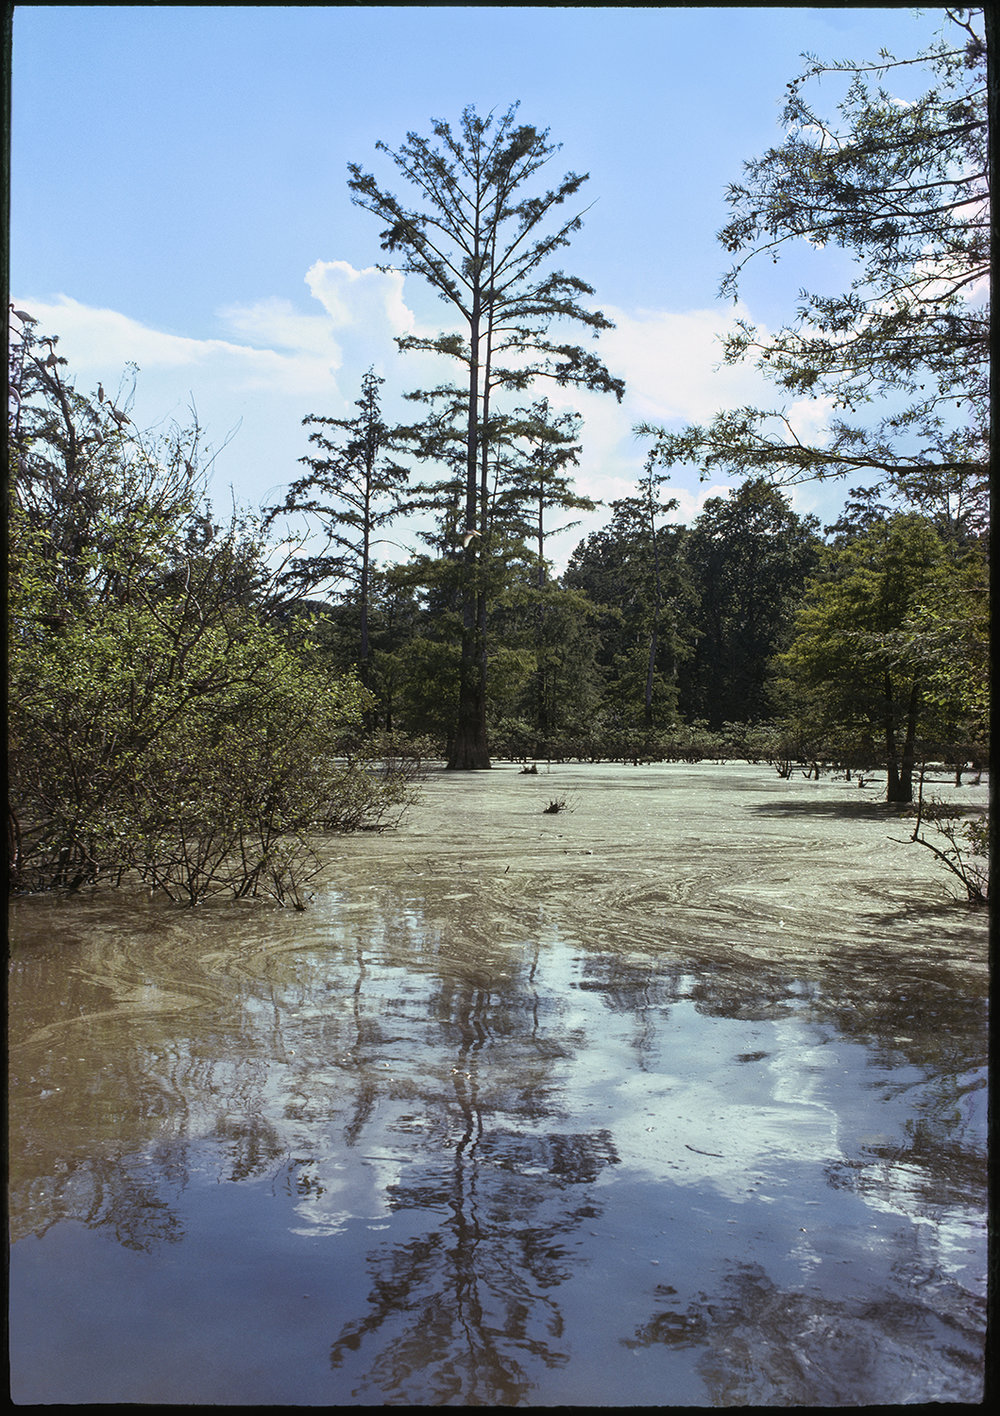   Wes Carter Lake, Warren County, Mississippi , 1974 20 × 13 in. (image size) The Do Good Fund, Inc., 2016-167 